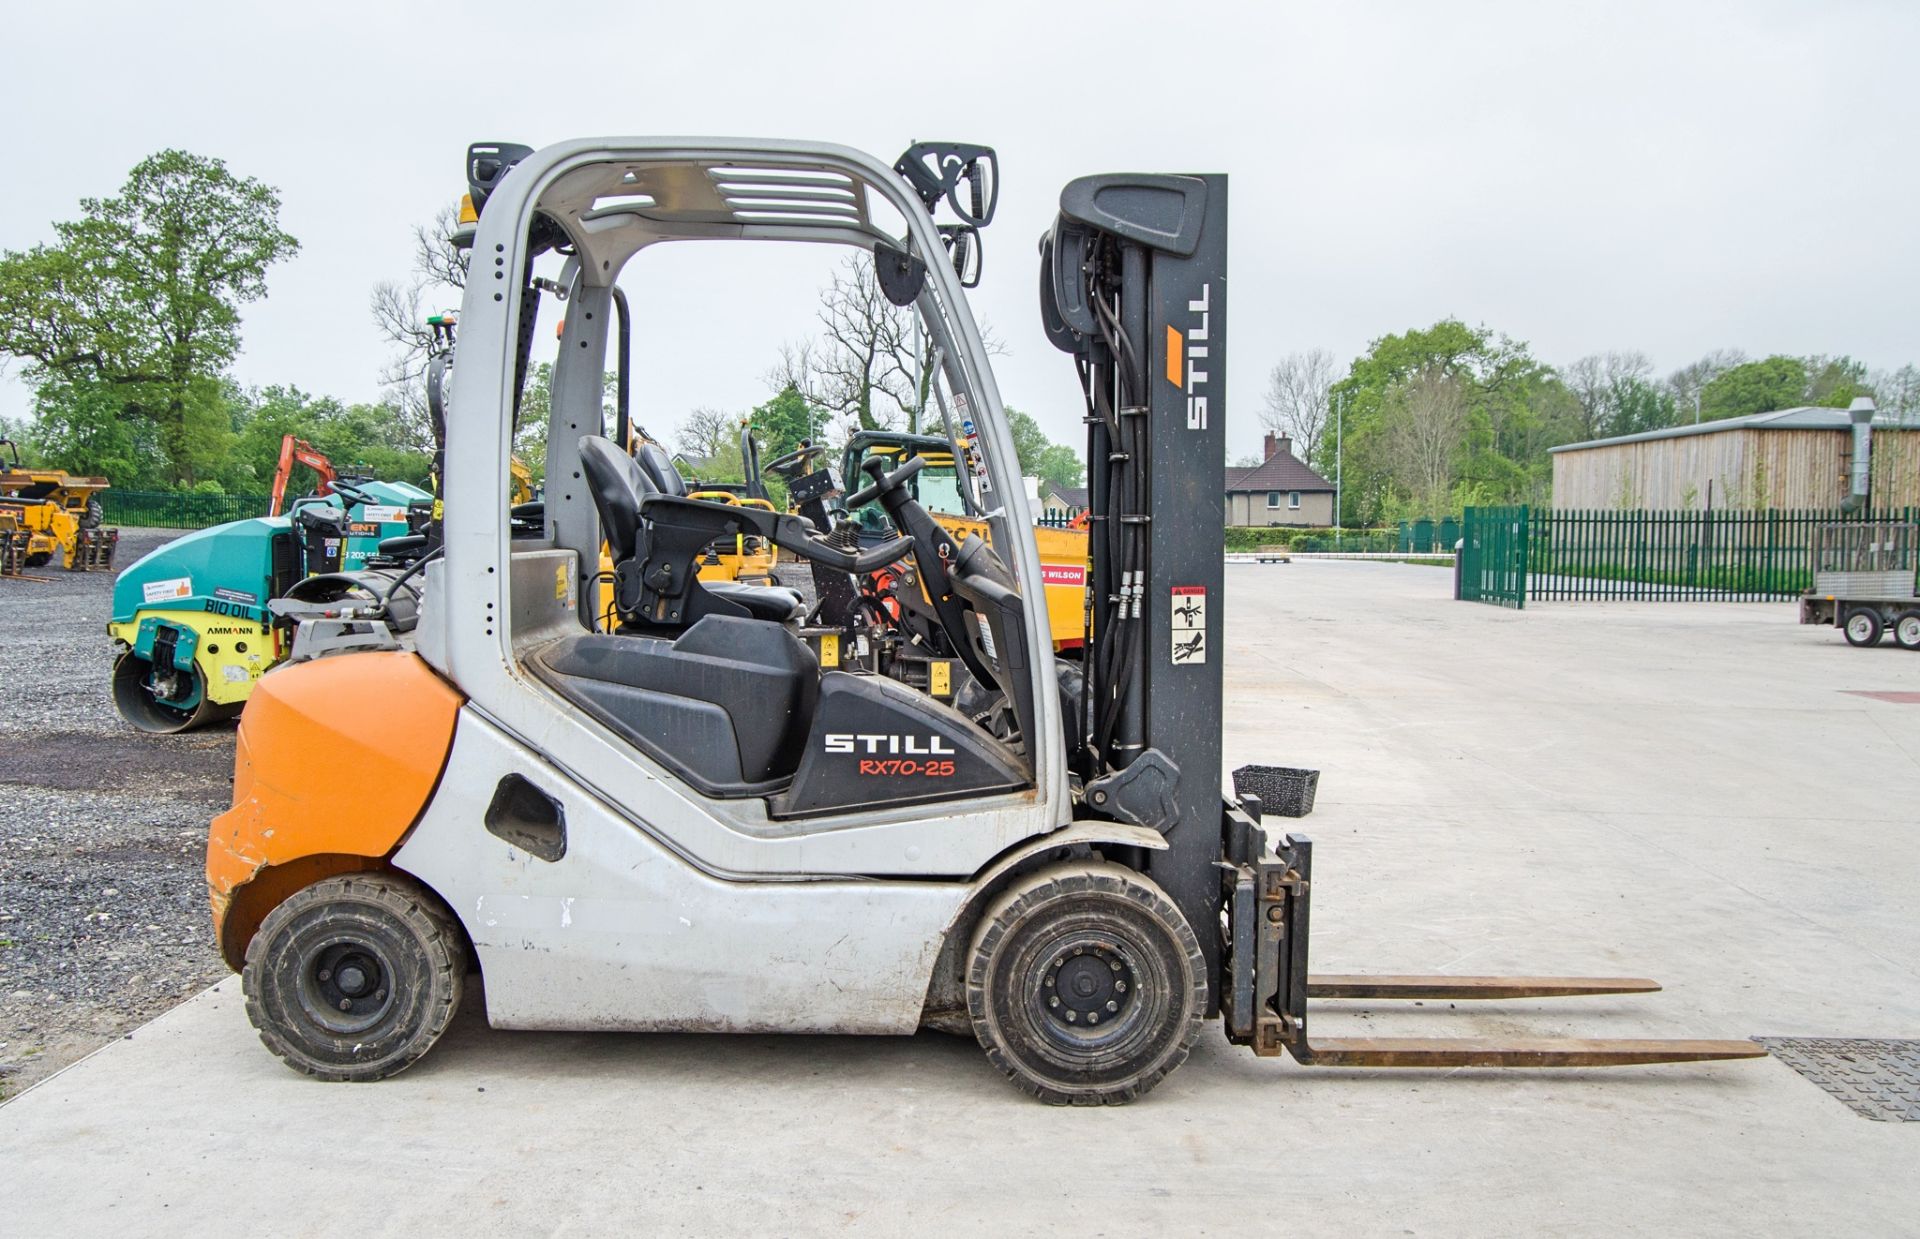 Still RX70-25 2.5 tonne gas powered fork lift truck Year: 2015 S/N: F000176 Recorded Hours: 9561 - Image 7 of 19